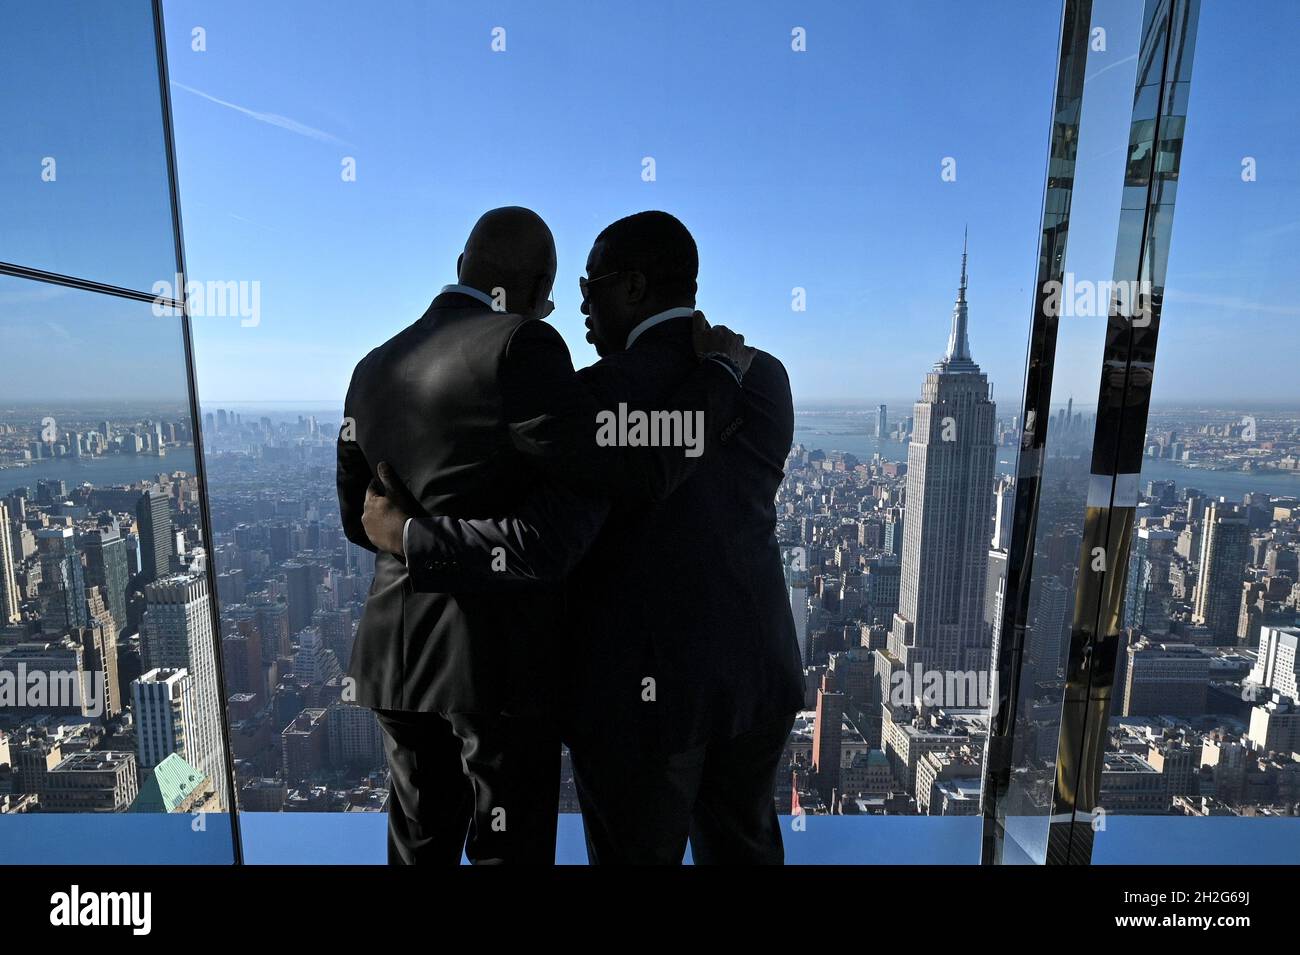 New York, USA. 21st Oct, 2021. (L-R) New York City Democratic Mayoral Candidate Eric Adams and New York Lt. Governor Brian Benjamin stand closely together as they talk during the ribbon cutting ceremony for Summit One Vanderbilt in New York, NY, October 21, 2021. Summit One Vanderbilt is an immersive experience and observation deck featuring the permanent 'Air' installation by Kenzo Digital, including an outdoor terrace, a glass elevator on the exterior of the building, and glass bottom booths overlooking Madison Avenue.(Photo by Anthony Behar/Sipa USA) Credit: Sipa USA/Alamy Live News Stock Photo